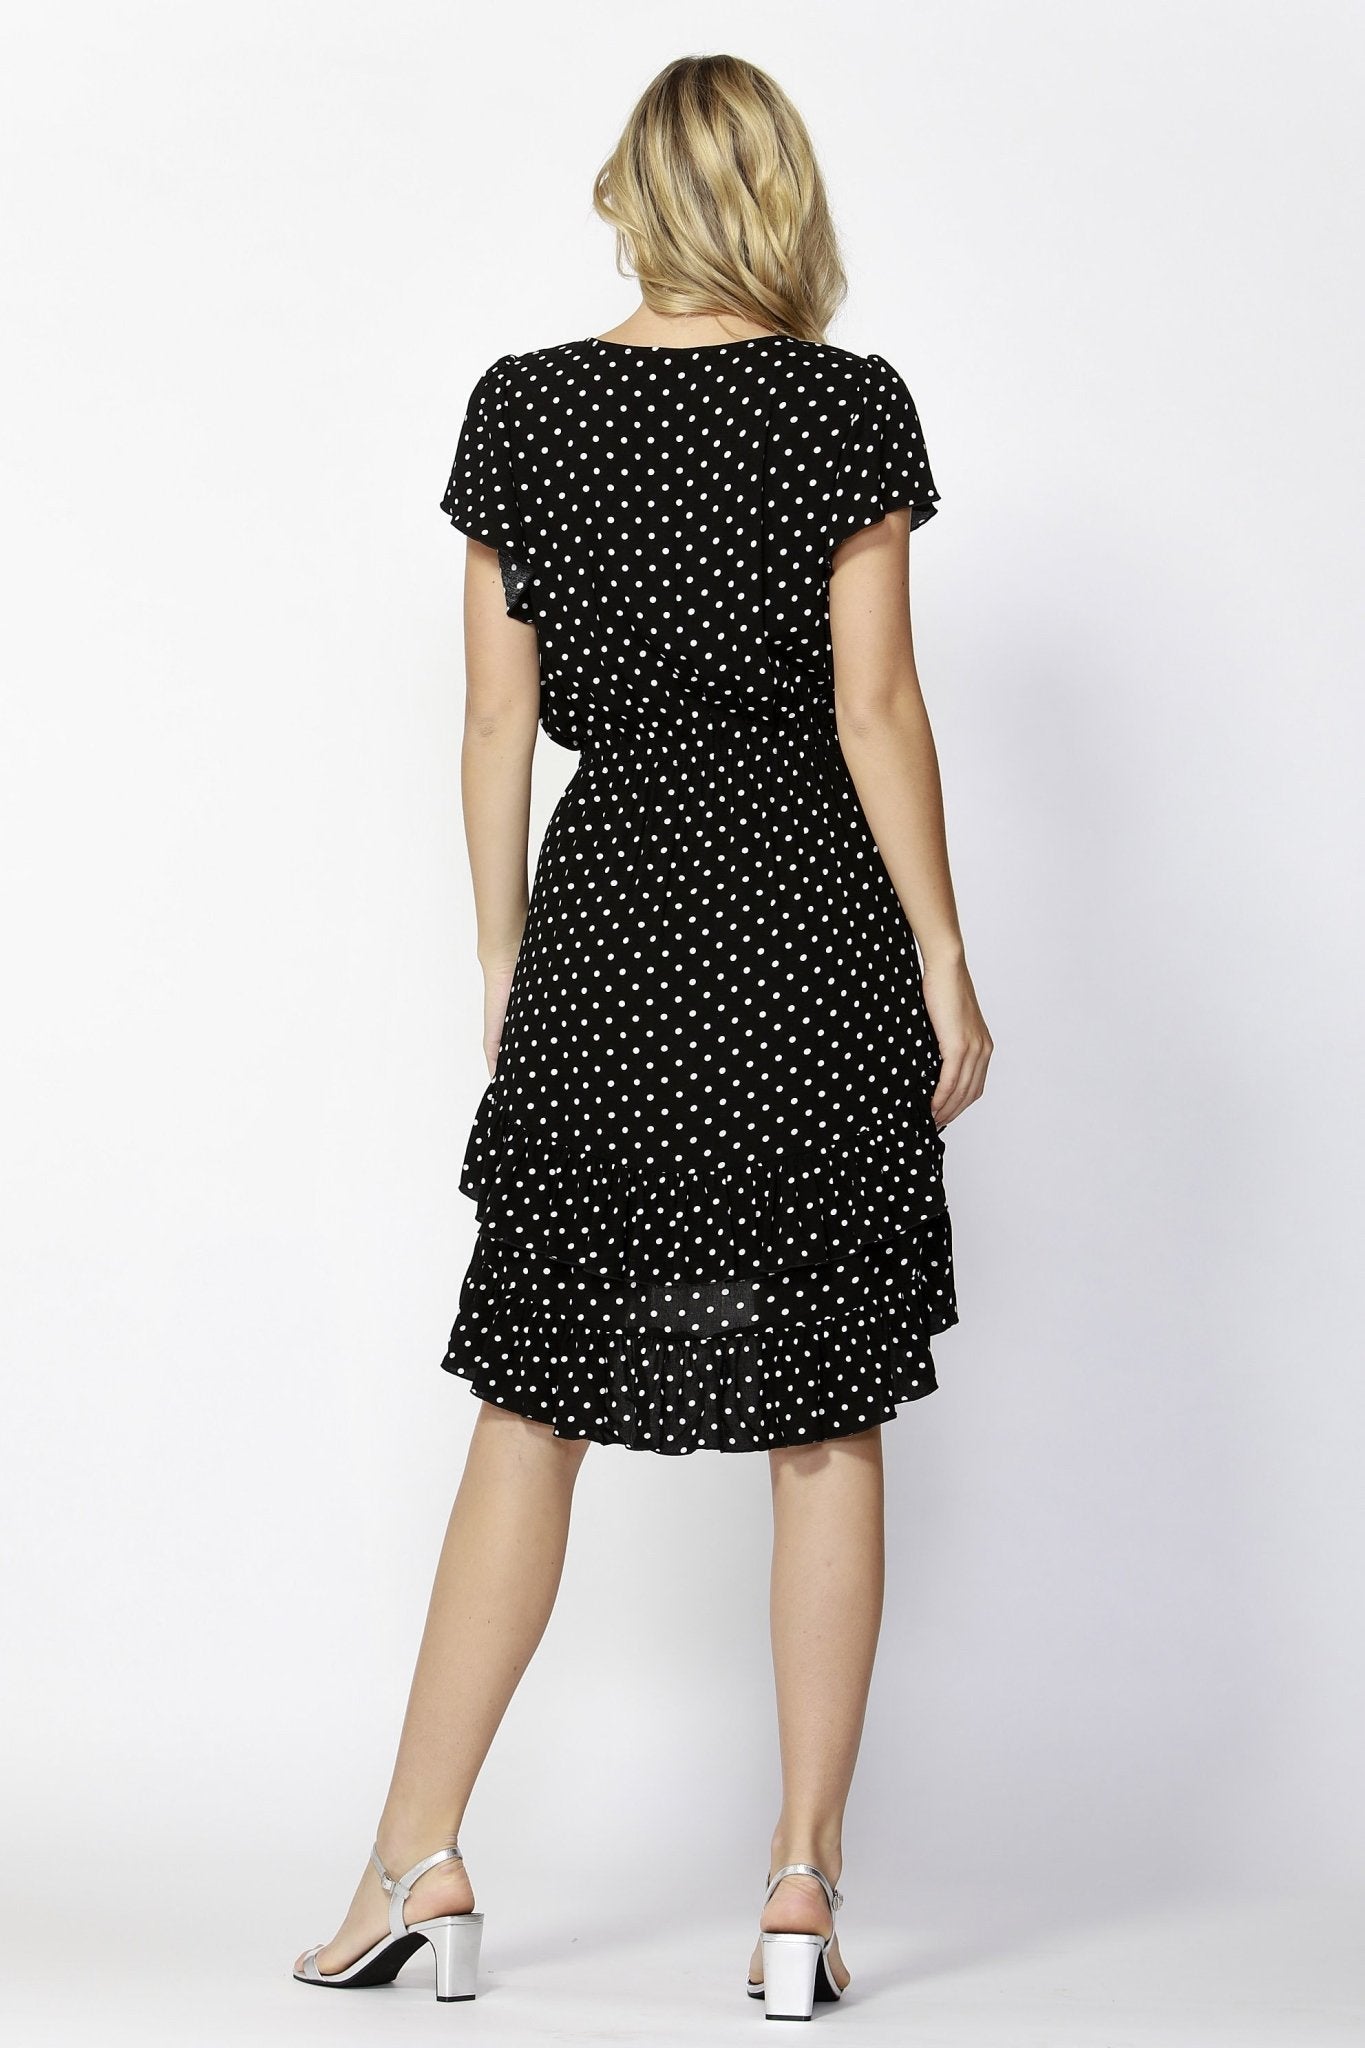 Fate + Becker Sunny Day Frilly Dress in Black / White Dots - Hey Sara